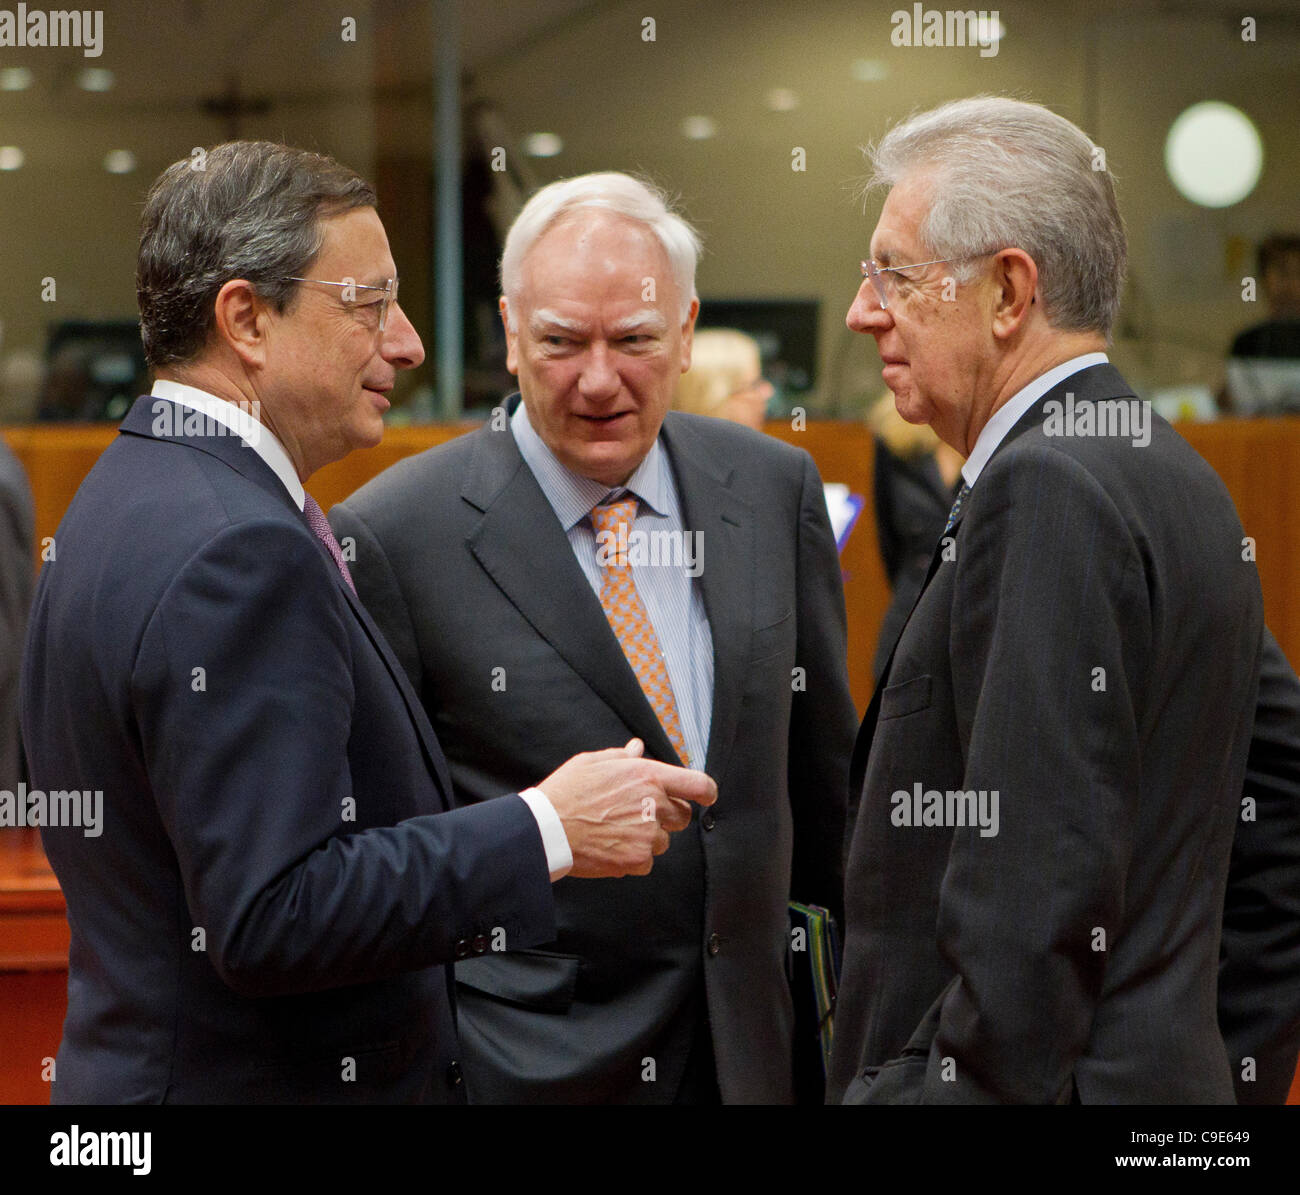 Pictured at the Ecofin meeting of European Finance Ministers Mario Draghi, President of the European Central Bank (ECB). Philippe Maystadt, President, European Investment Bank (EIB). Mario Monti, Prime Minister and Finance Minister, Italy. Stock Photo